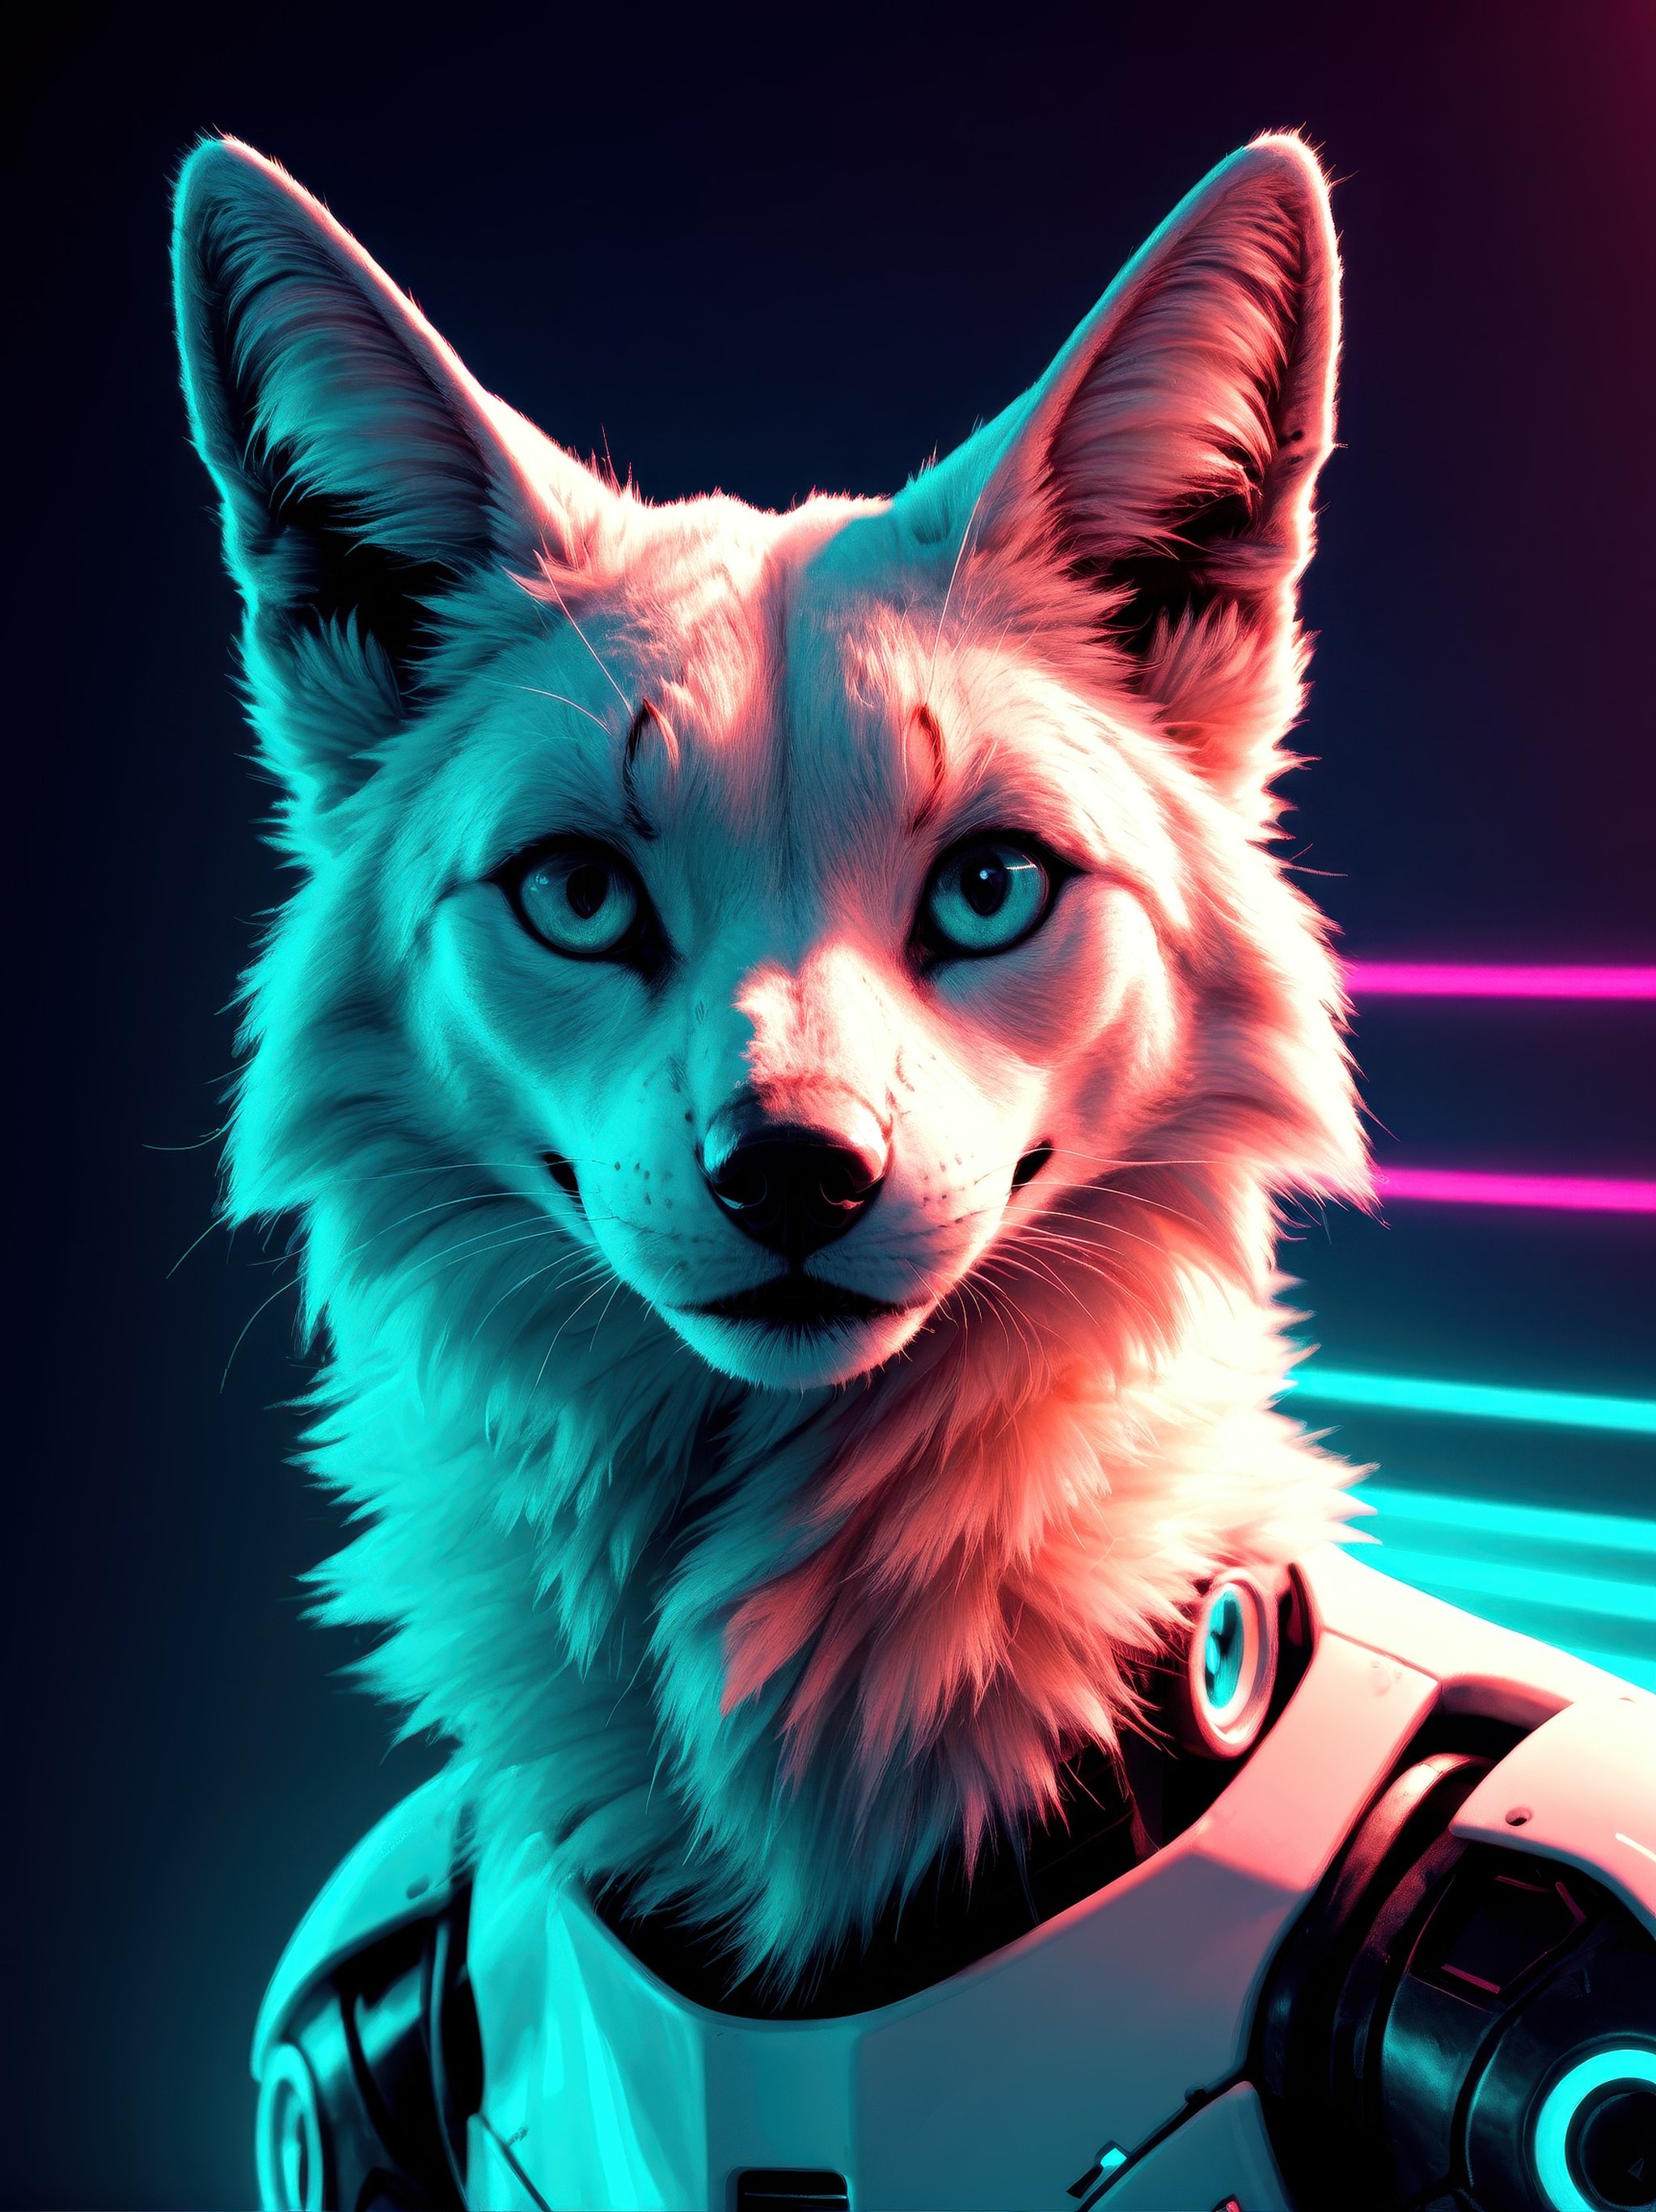 score_9, score_8_up, score_7_updigital neon green and white fox, retrowave palette, digital world, highly detailed, electric breeze, anatomically correct vulpine, synth feel, fluffy face, ear floof, flowing fur, super realism, accurate animal imagery, 4 k digital art